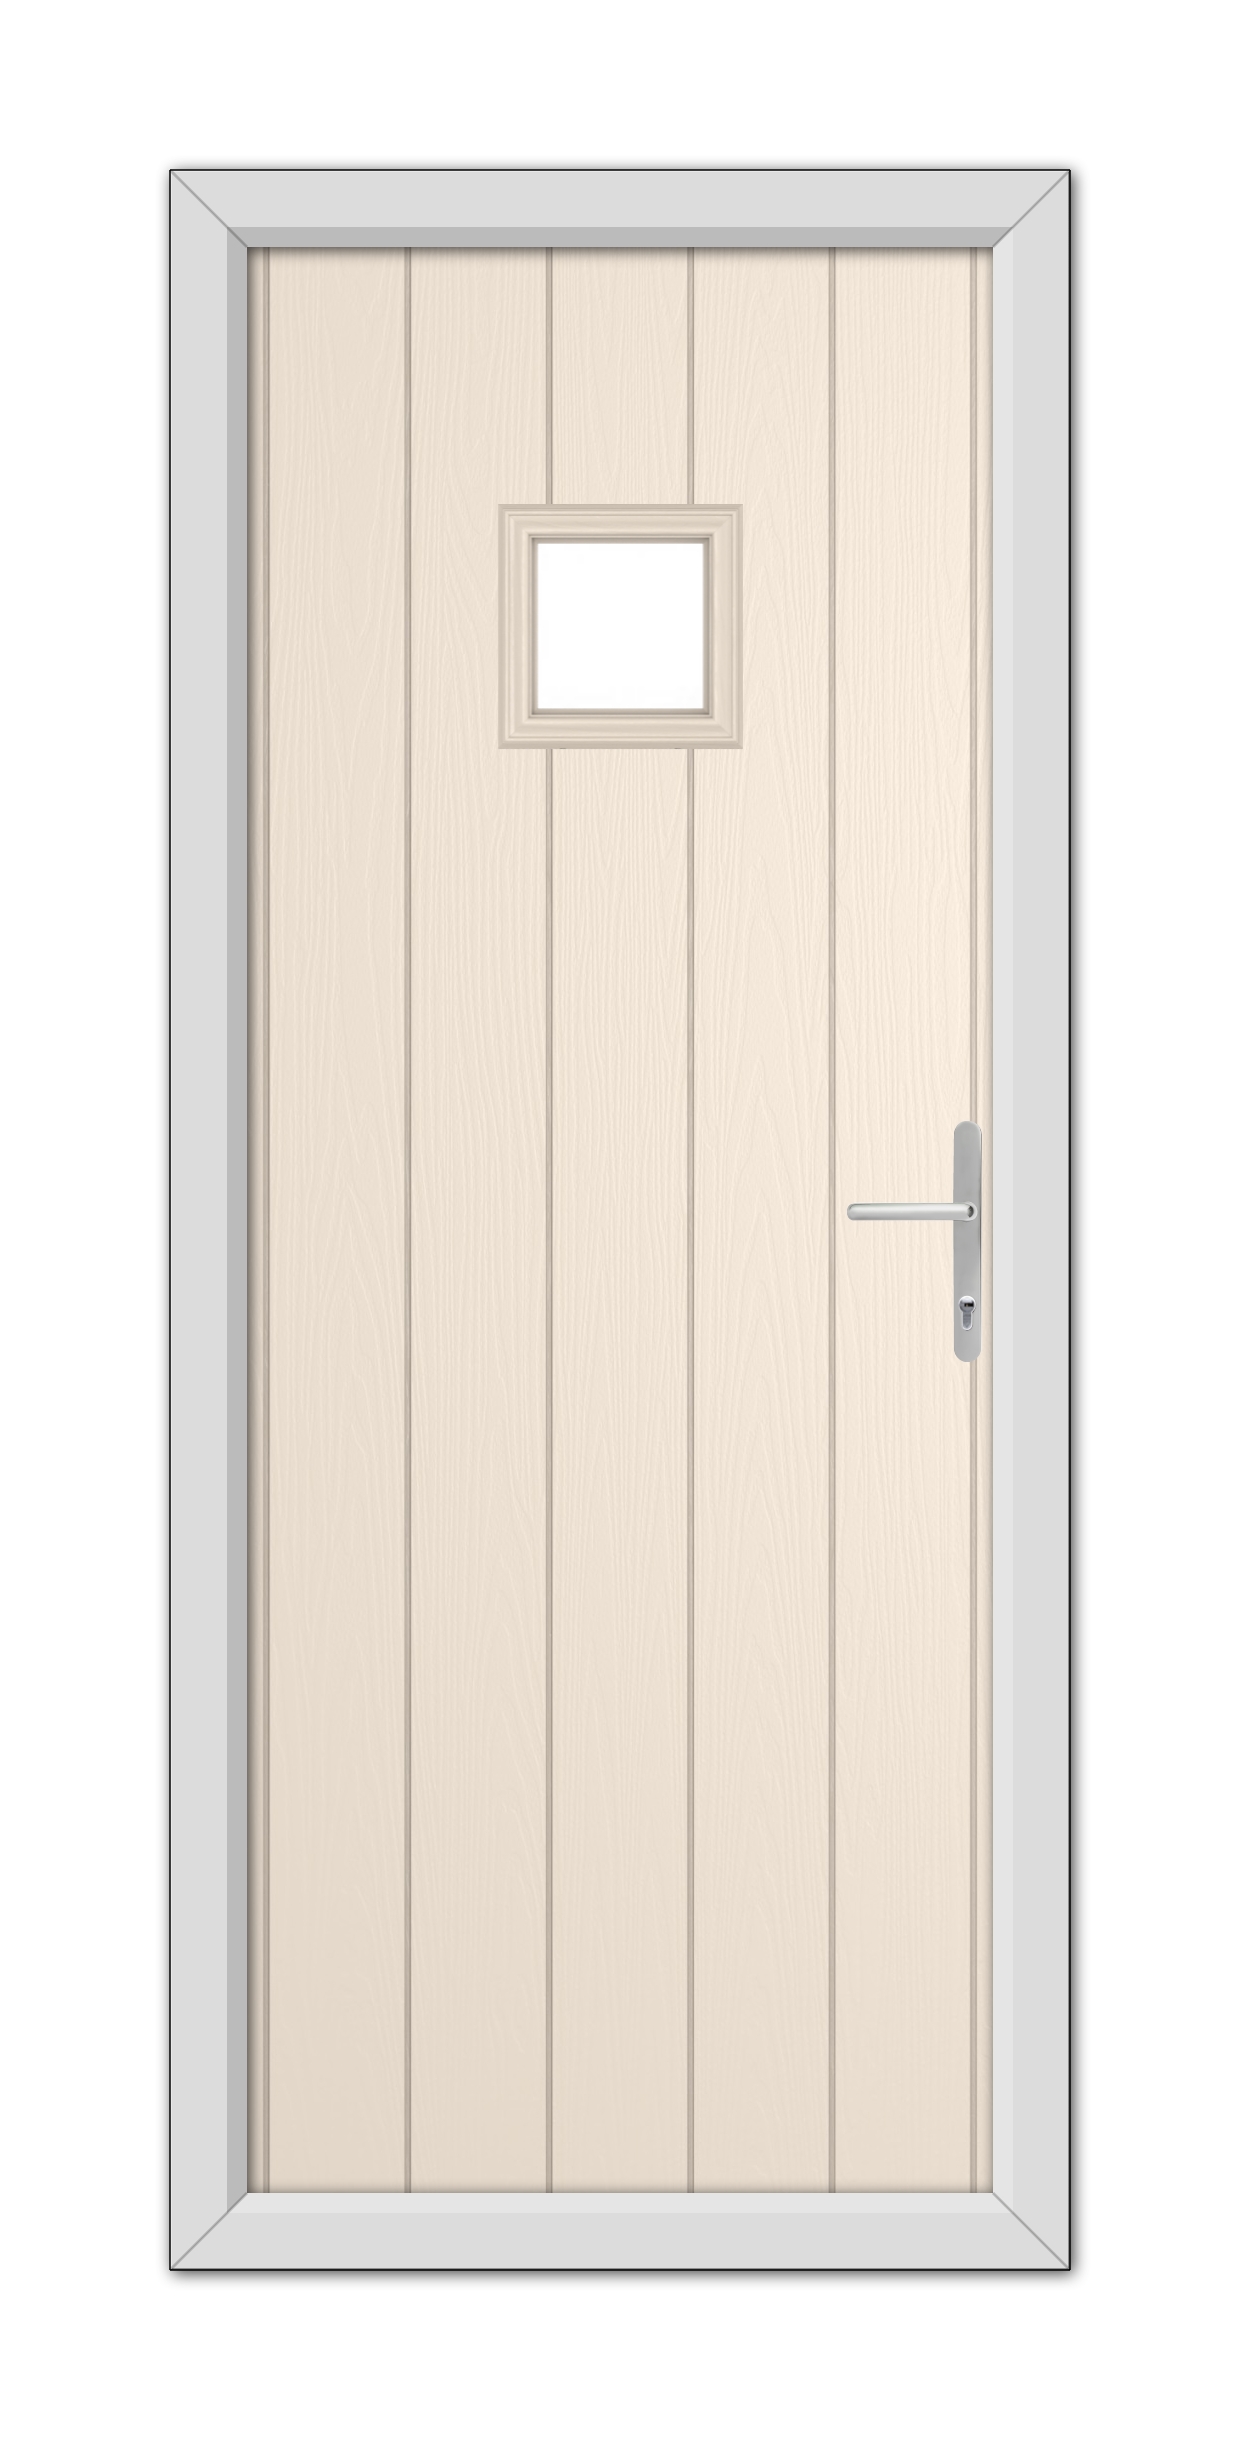 Cream Brampton Composite Door 48mm Timber Core with a metal handle and small rectangular window, set within a gray frame.